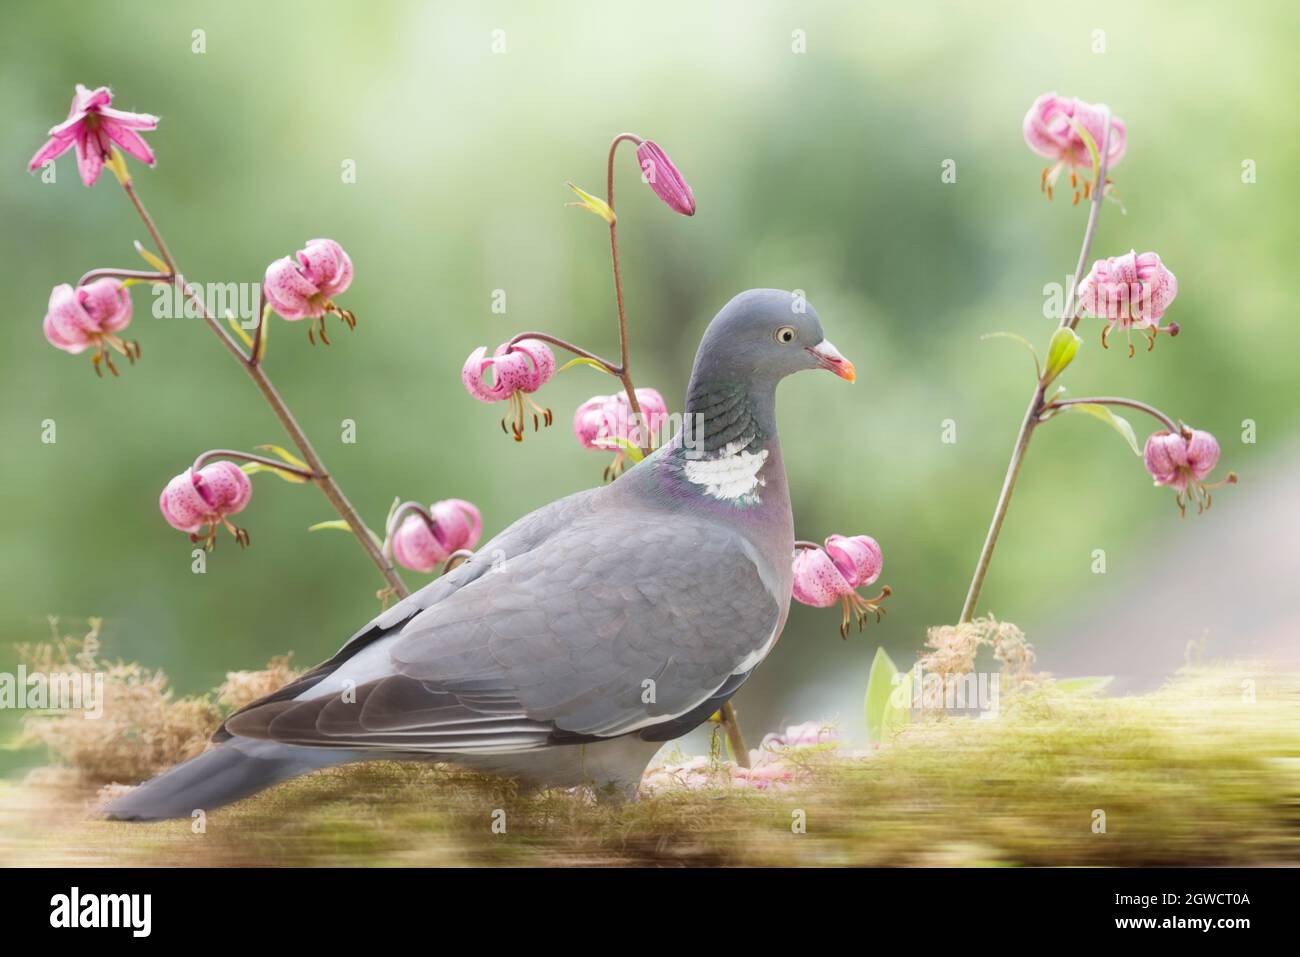 wood pigeon standing with an lily Stock Photo